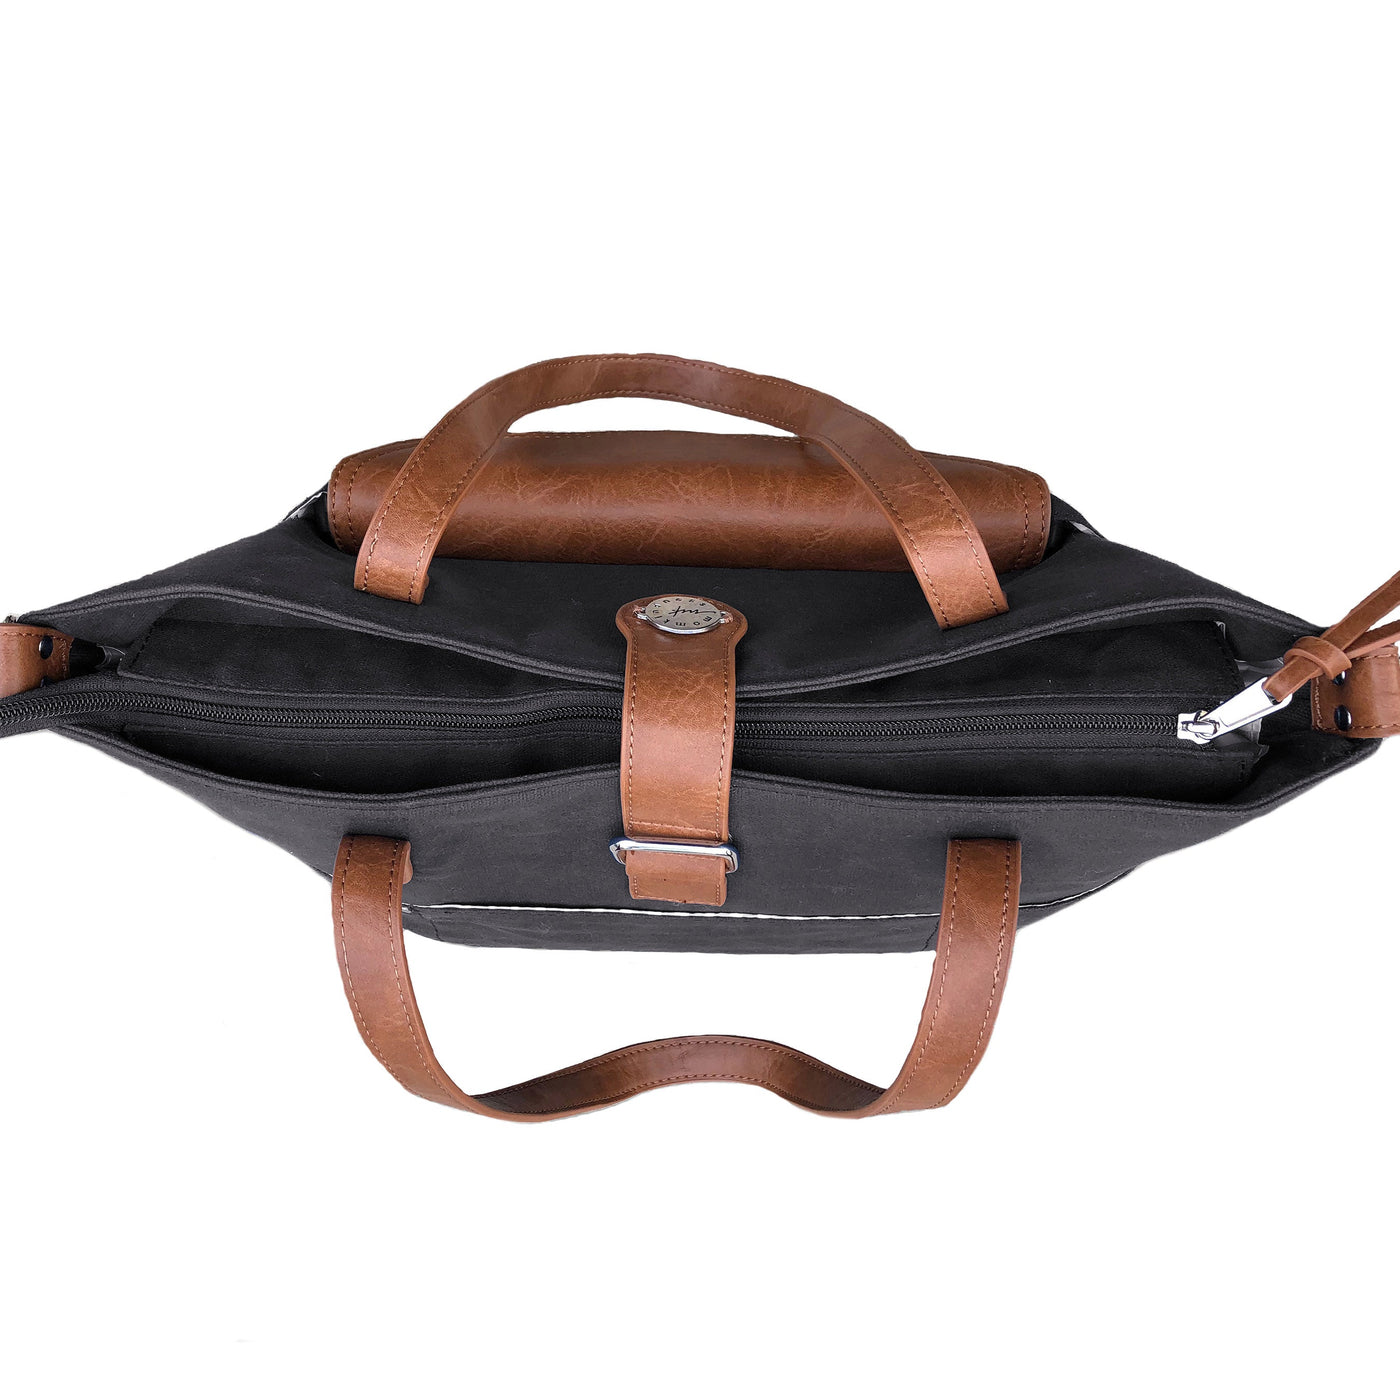 Top down view of black canvas tote bag with brown vegan leather accents with closed zipper top.